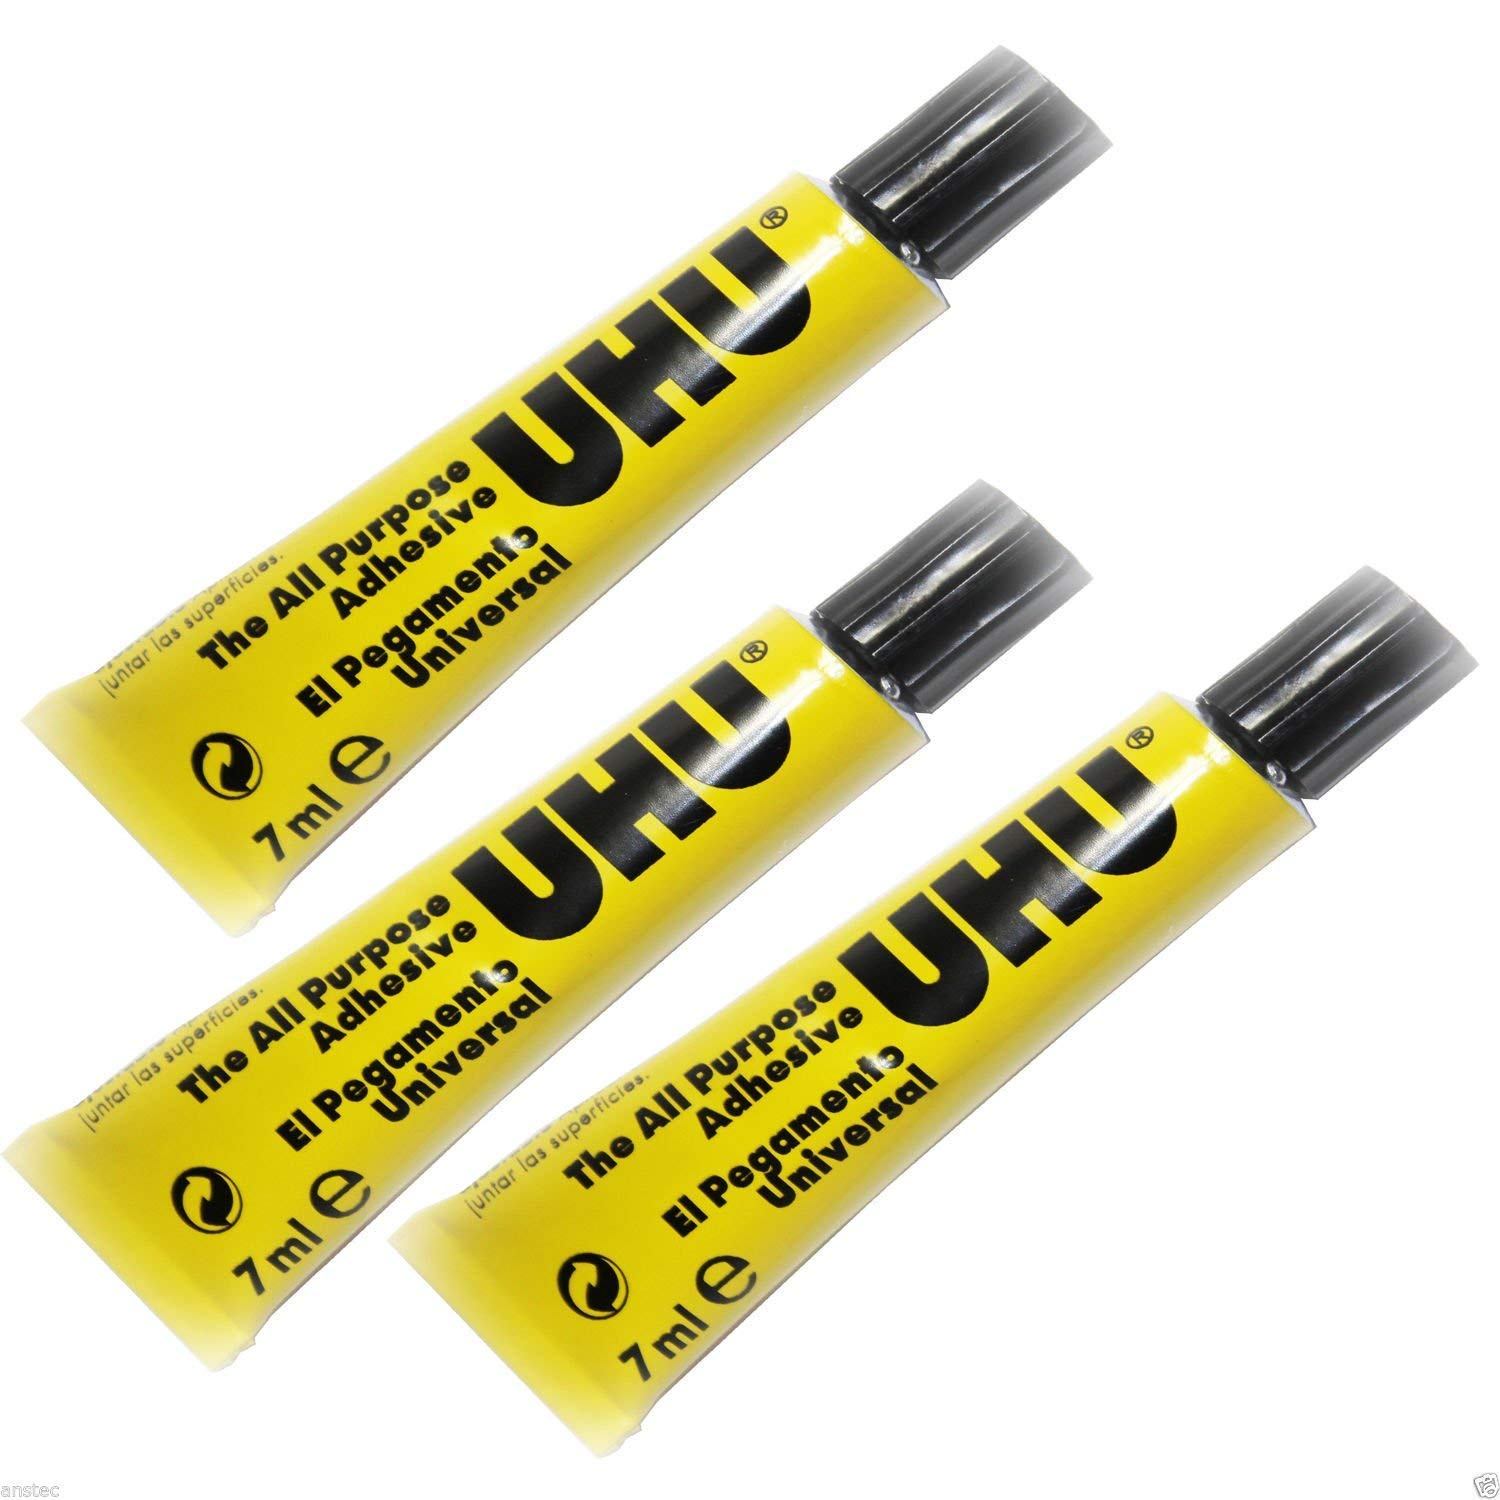 Where Can I Buy Uhu Glue In The Usa